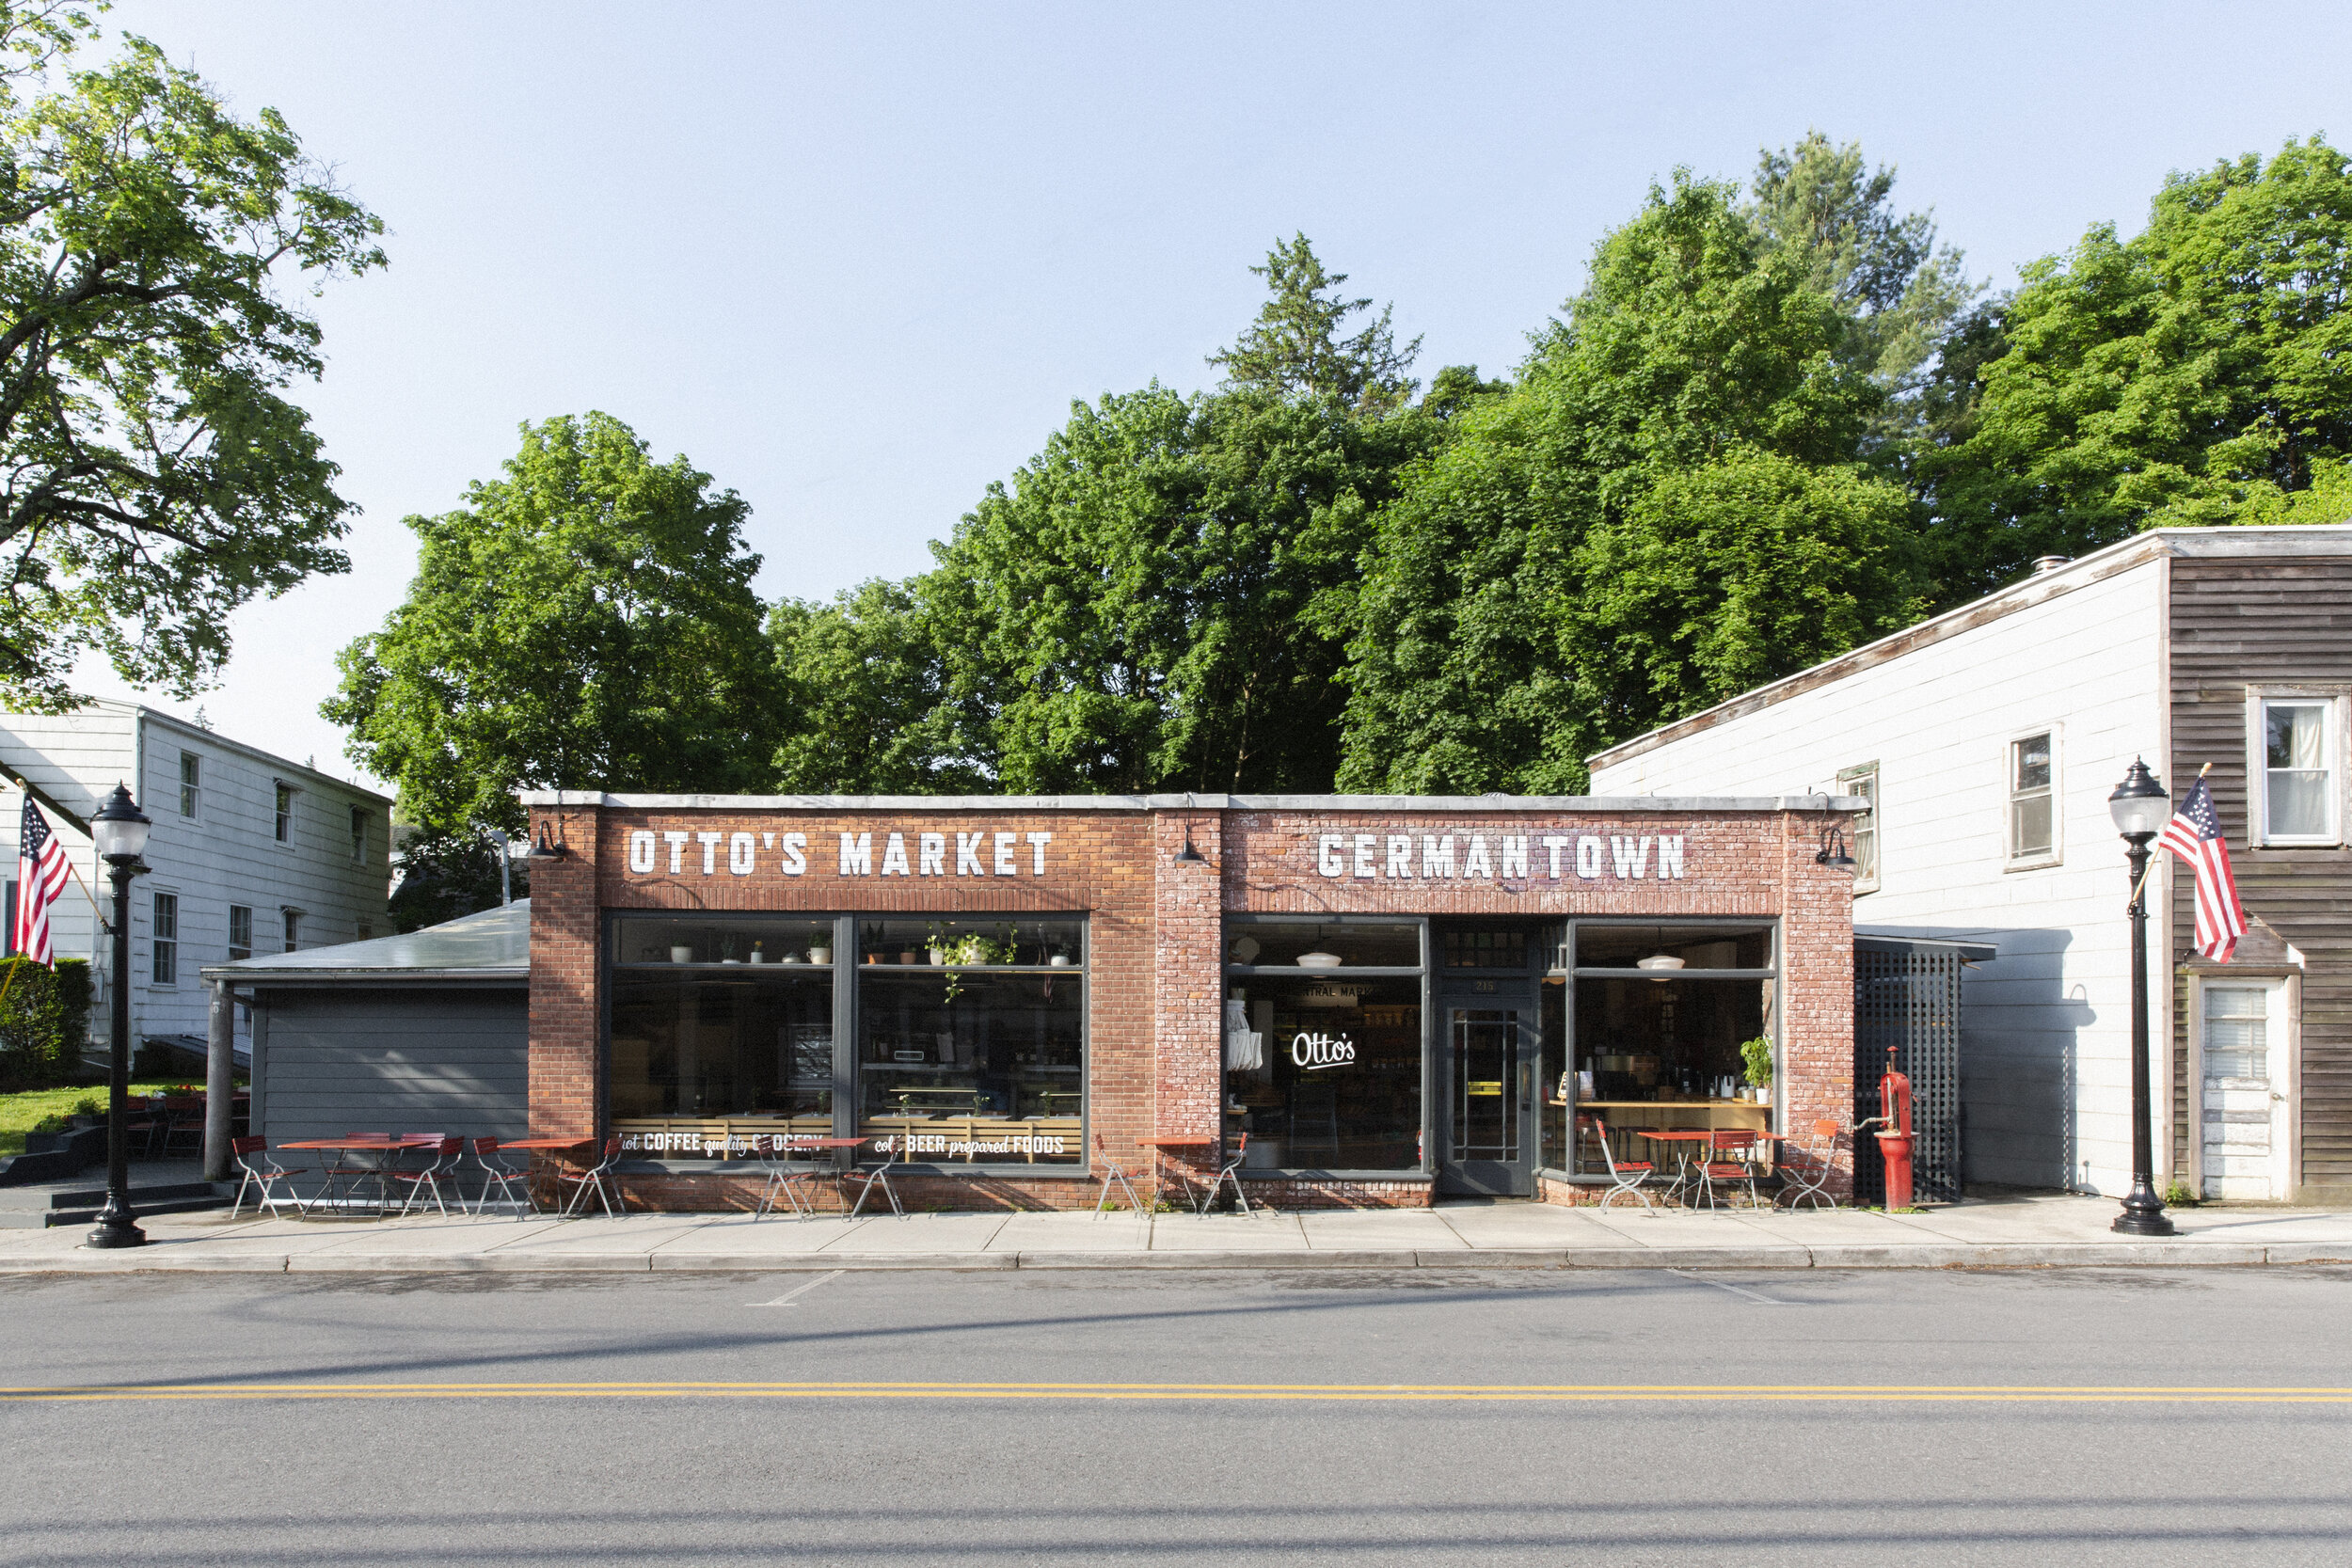 Complete gut renovation / addition to Otto's Market in Germantown, NY